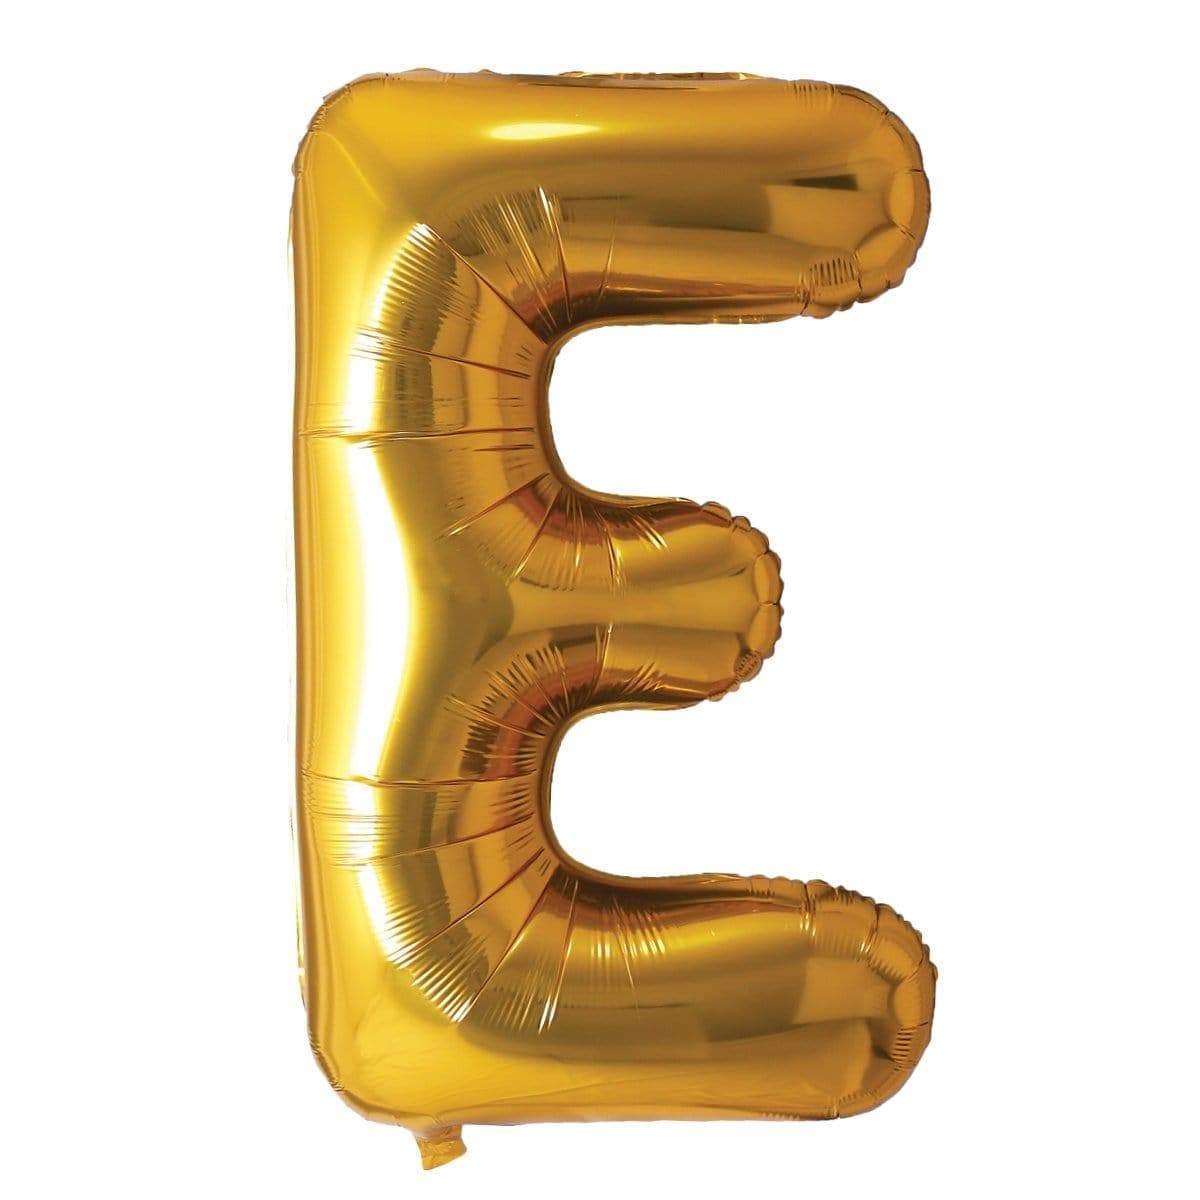 Buy Balloons Gold Letter E Foil Balloon, 34 Inches sold at Party Expert